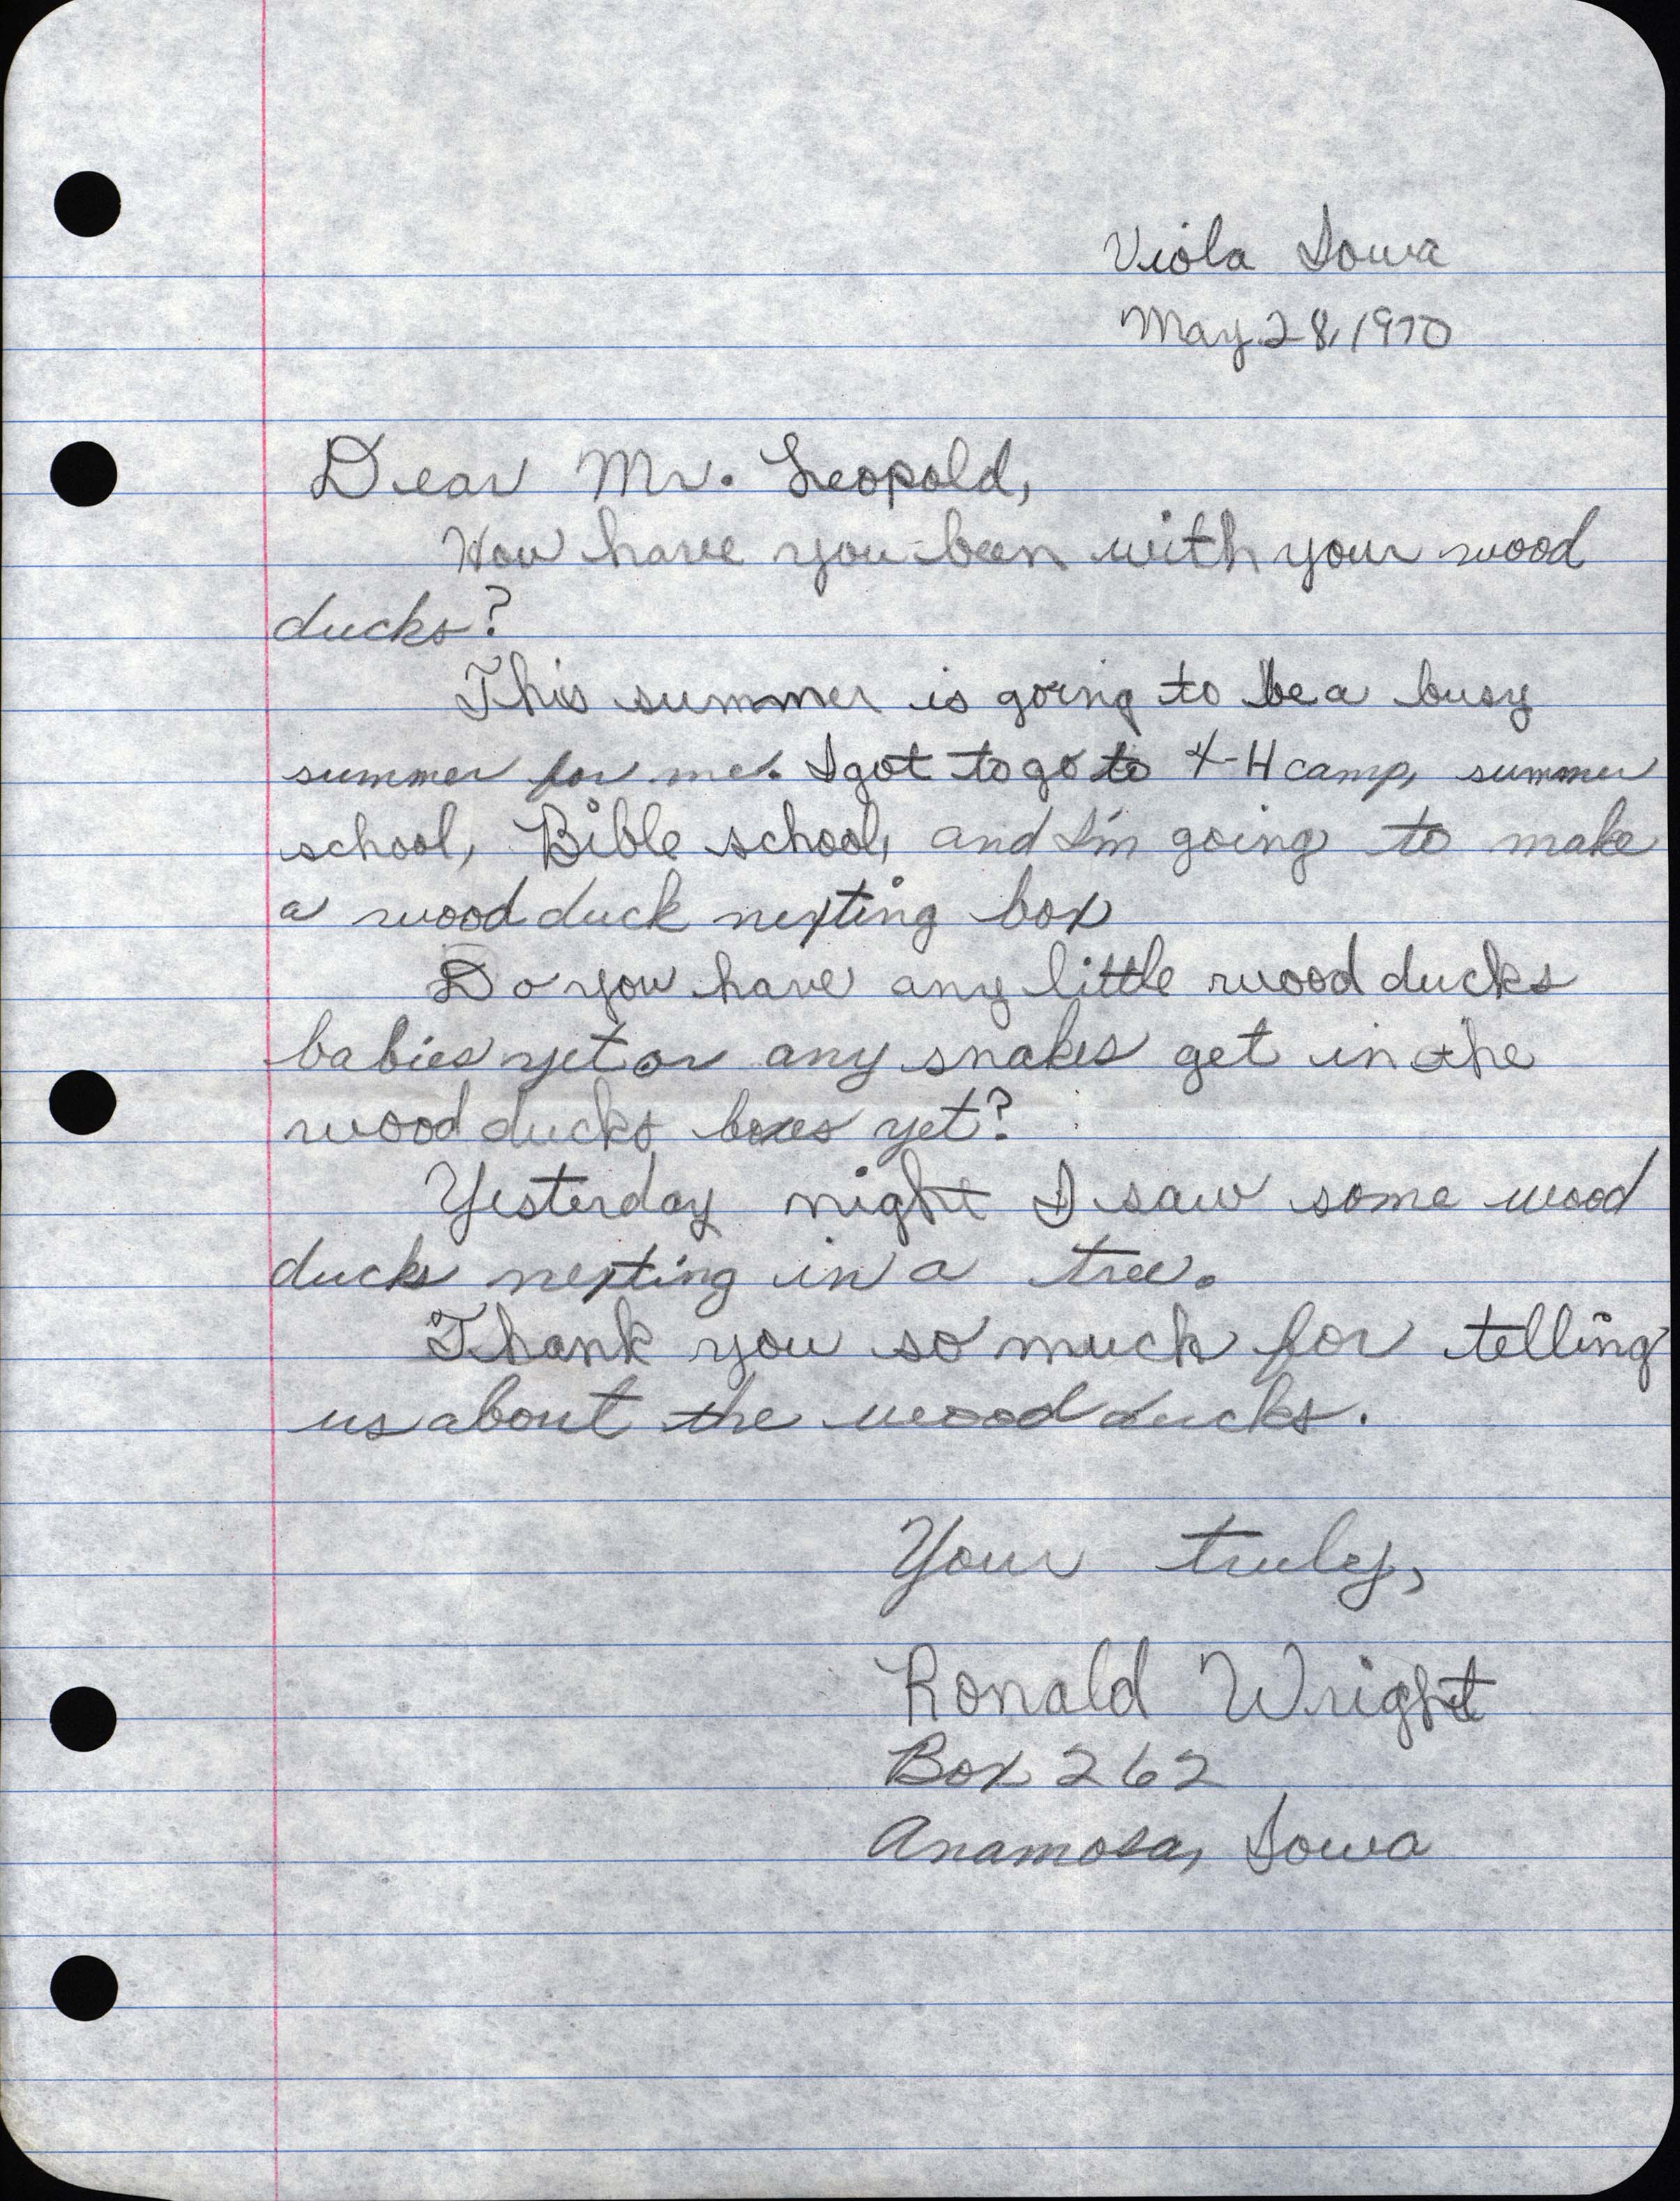 Letter from Wilma Walton with an enclosed letter from Ronald Wright to Frederic Leopold regarding Wood Ducks, May 28, 1970